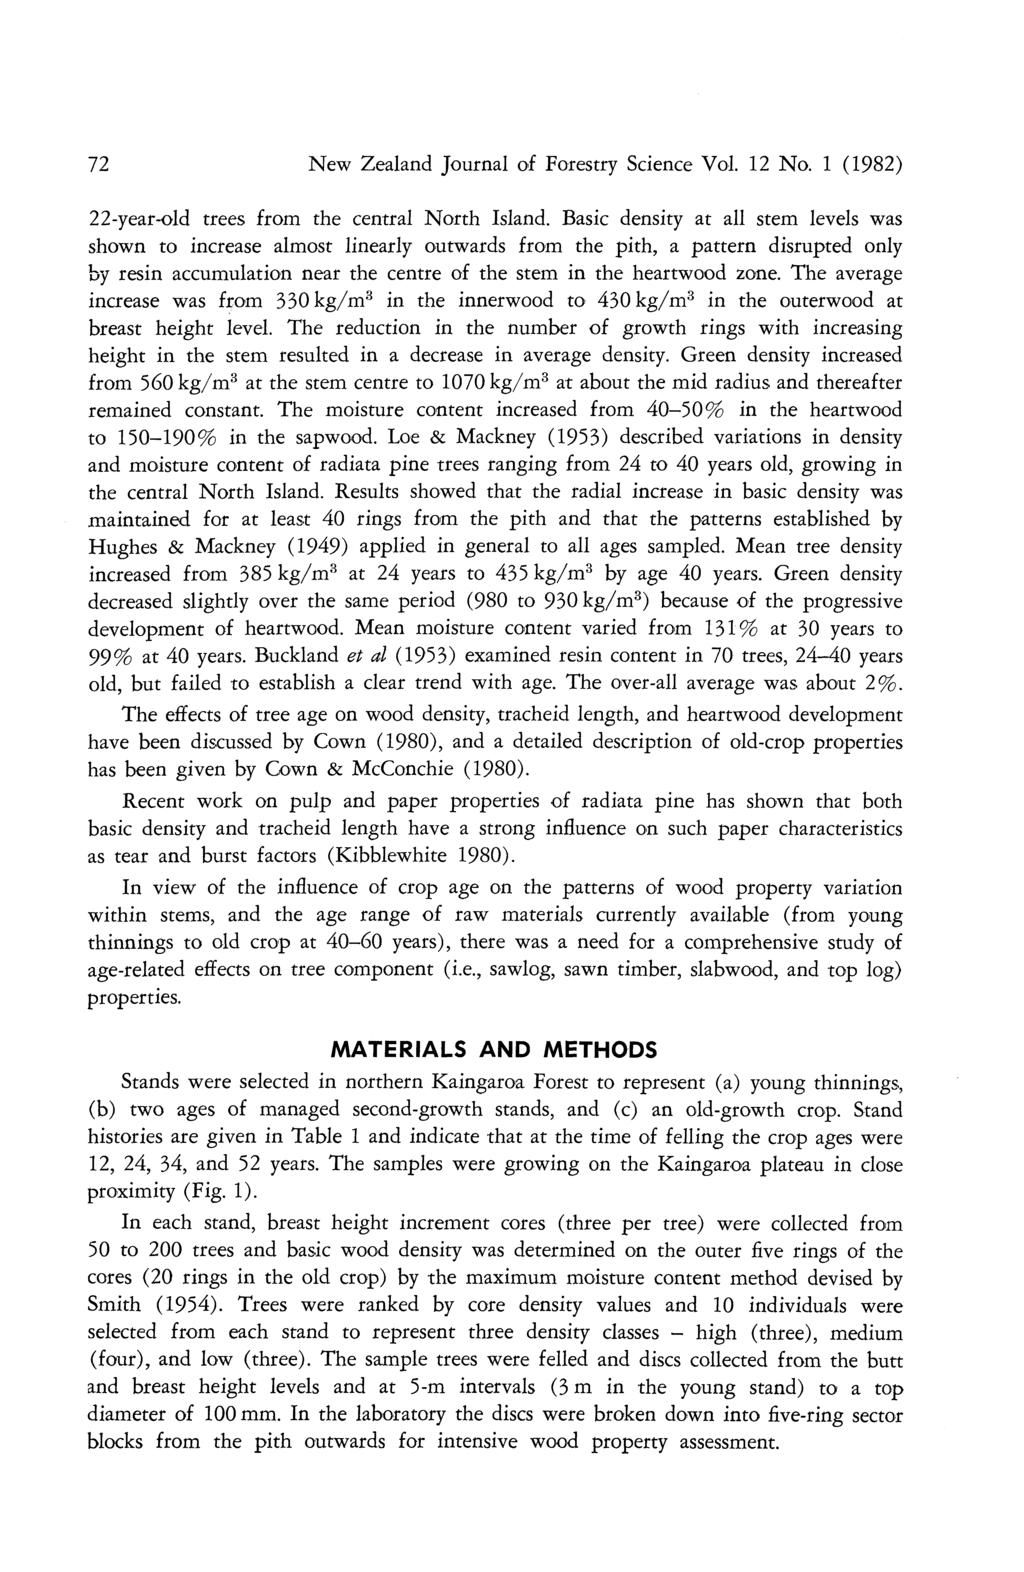 72 New Zealand Journal of Forestry Science Vol. No. 1 (1982) 2 2-year-old trees from the central North Island.